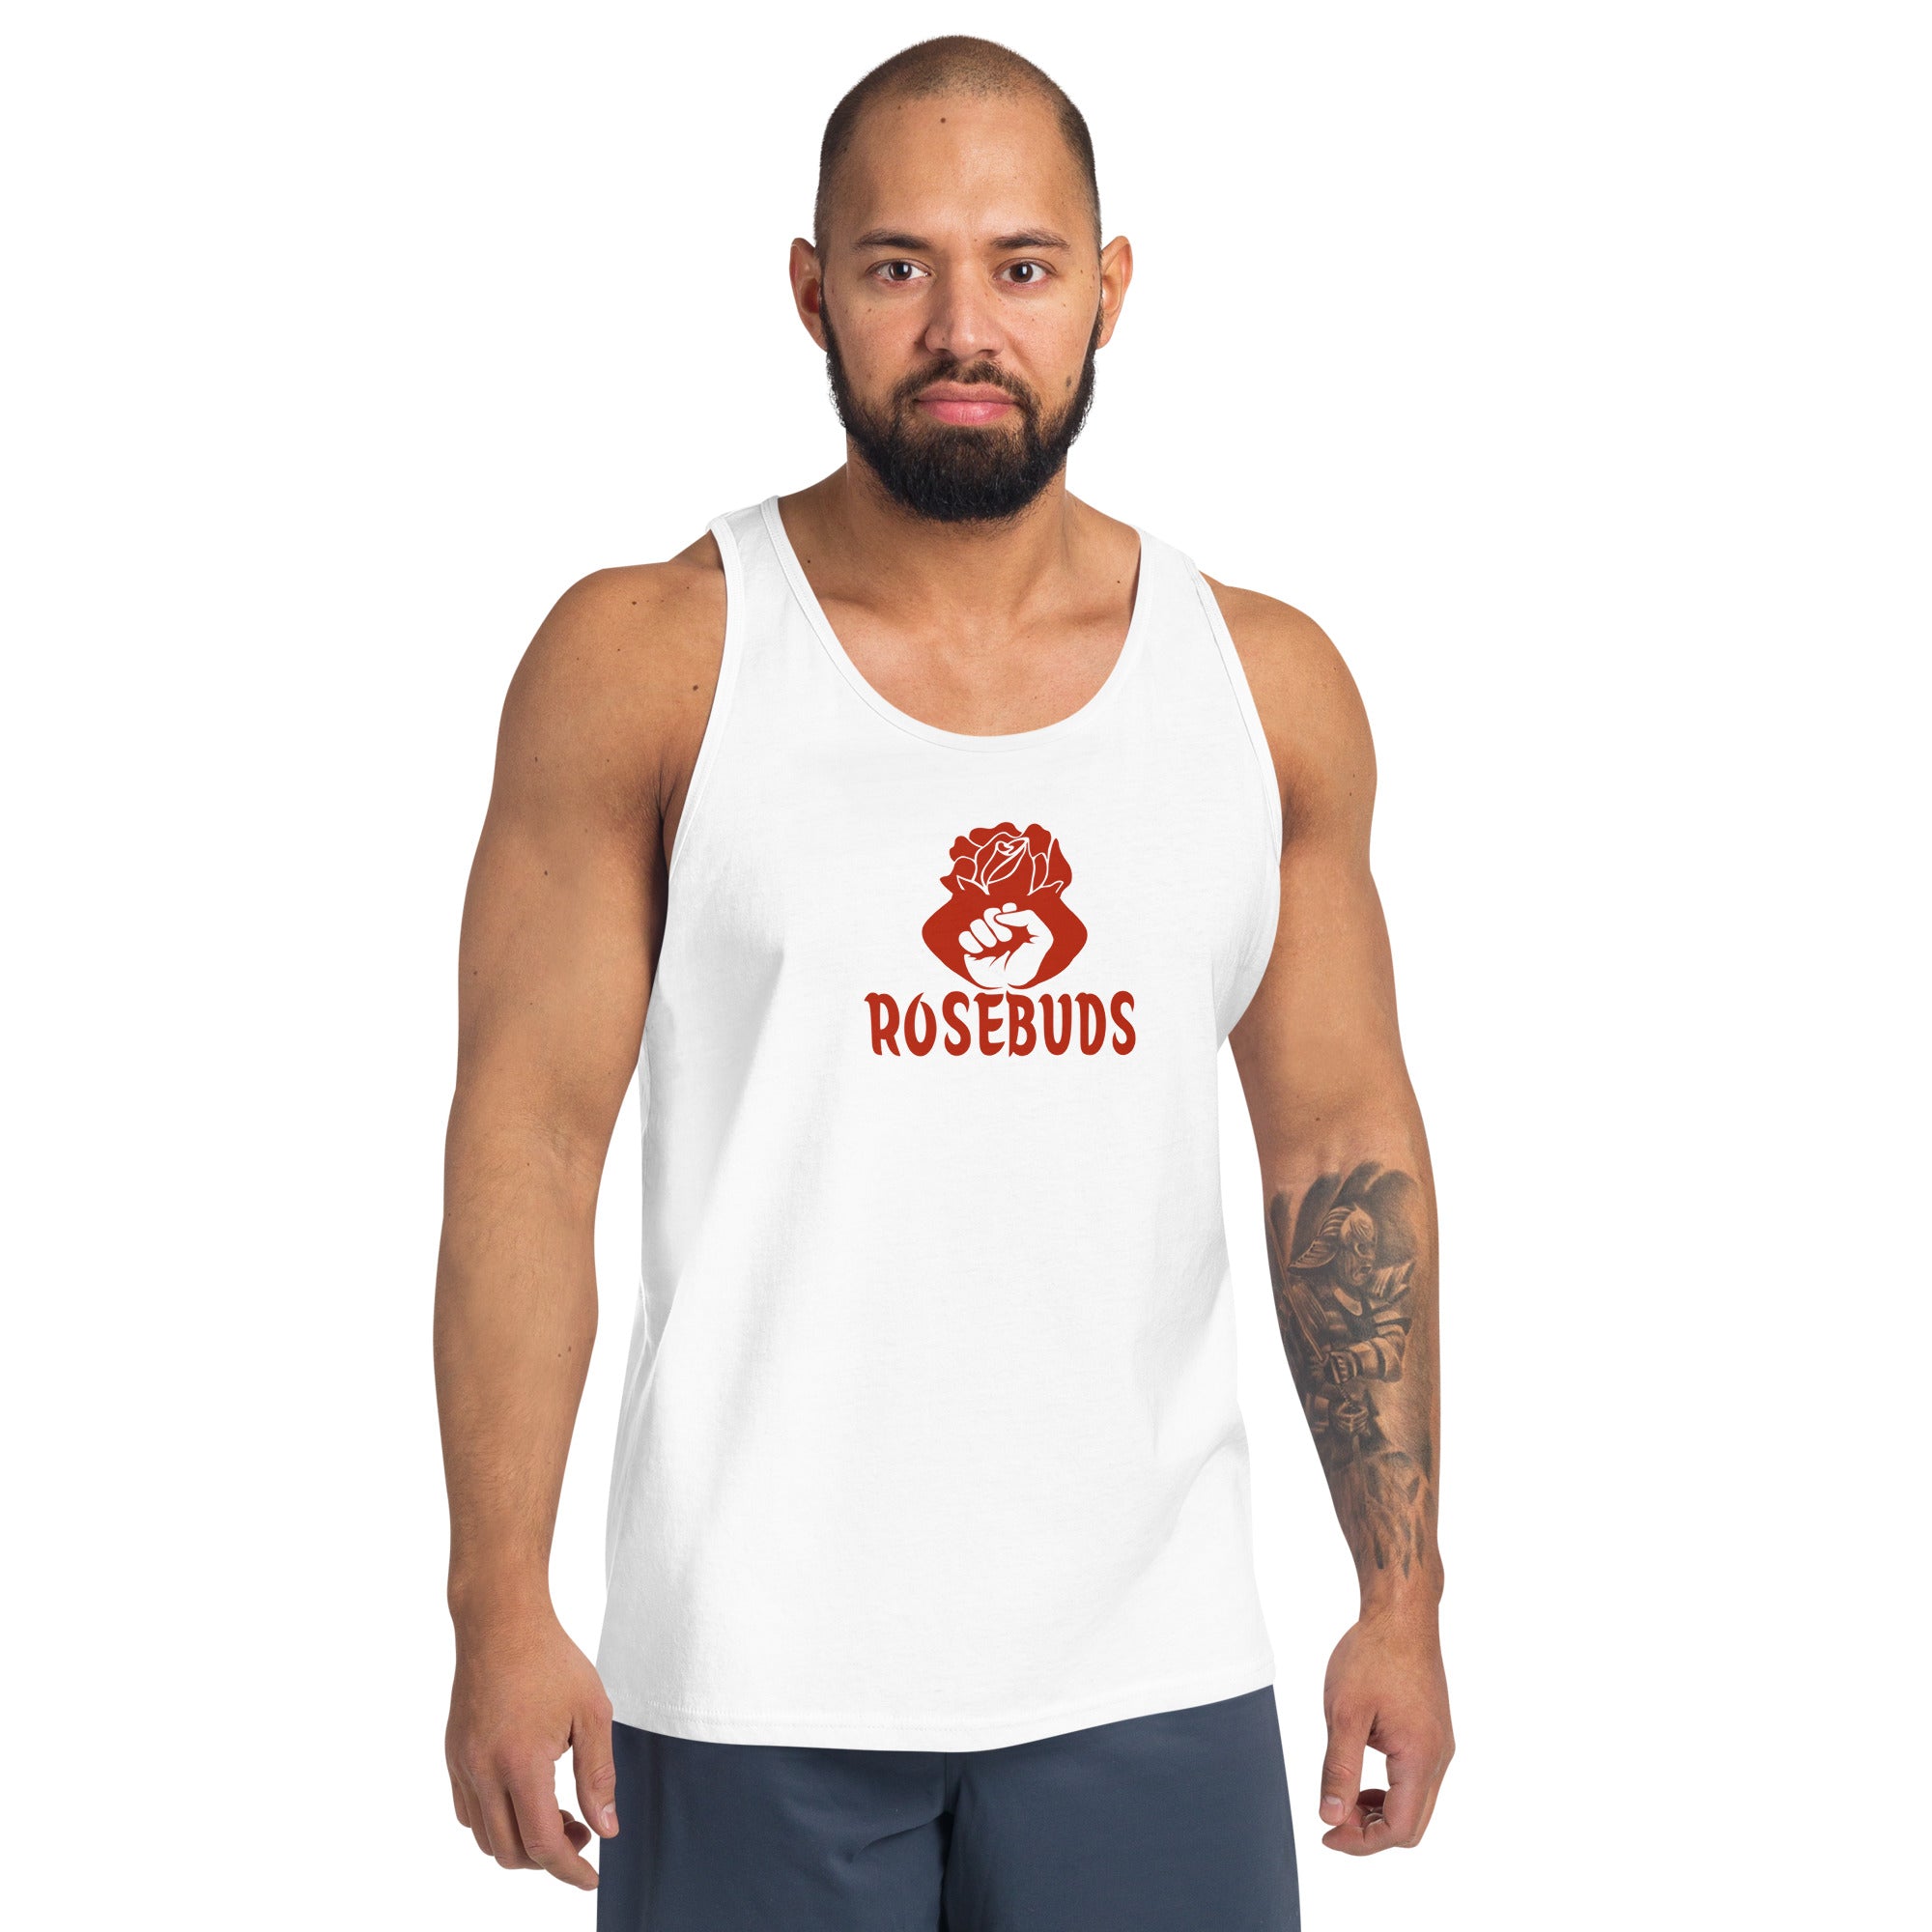 Busch Gardens Mens Distressed Fist Muscle Tank Top White X-Large